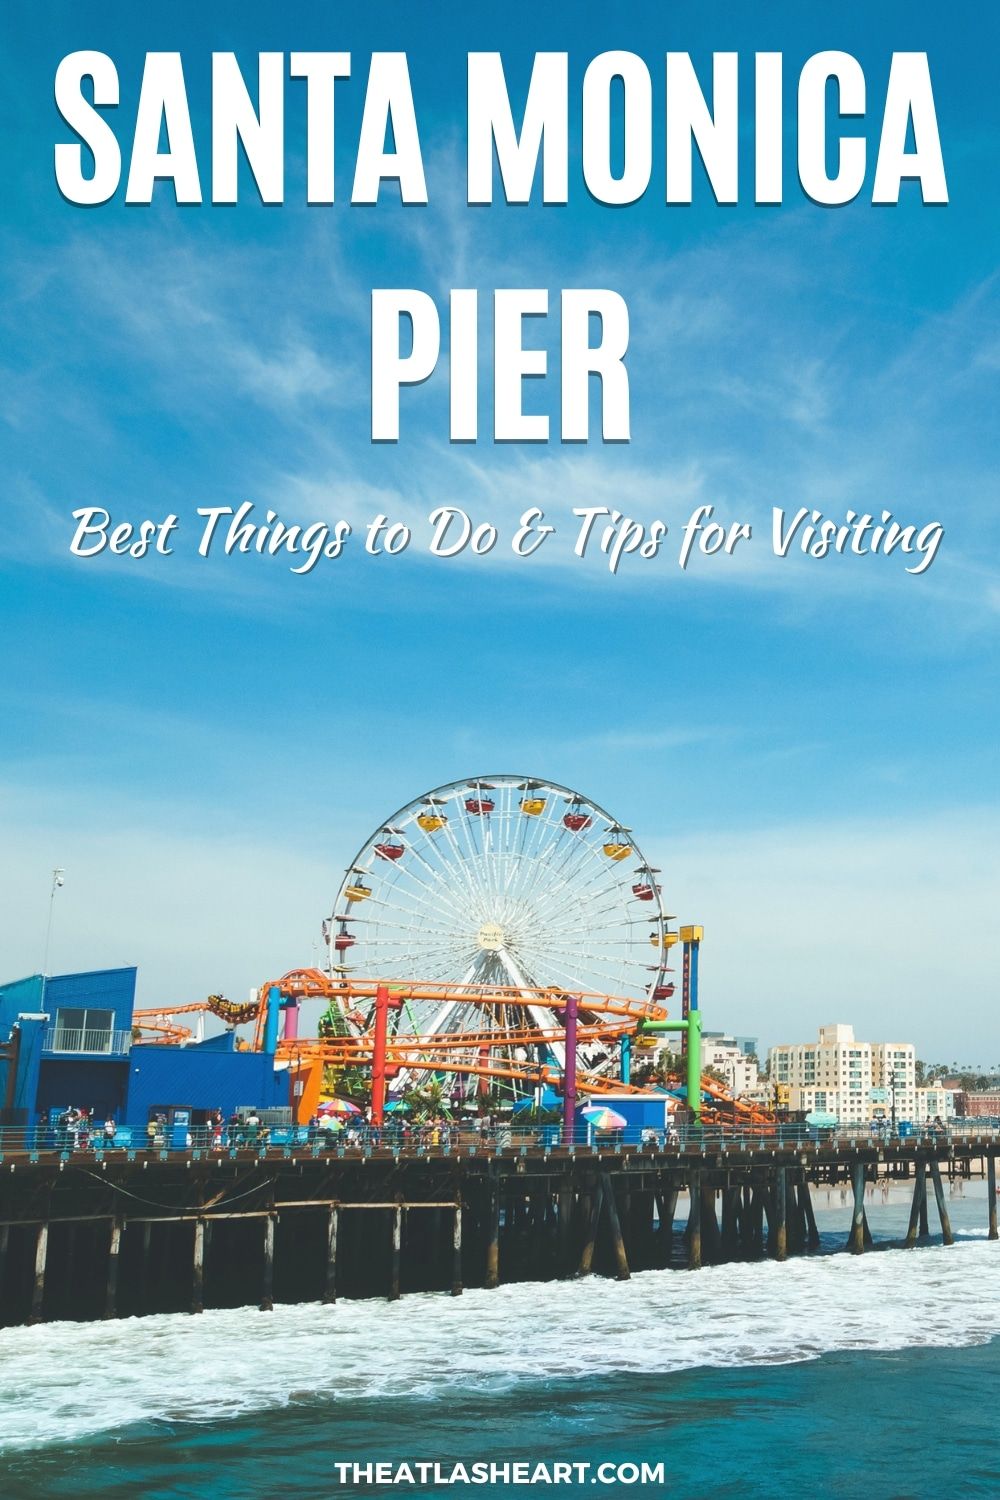 Santa Monica Pier: BEST Things to Do & Tips for Visiting